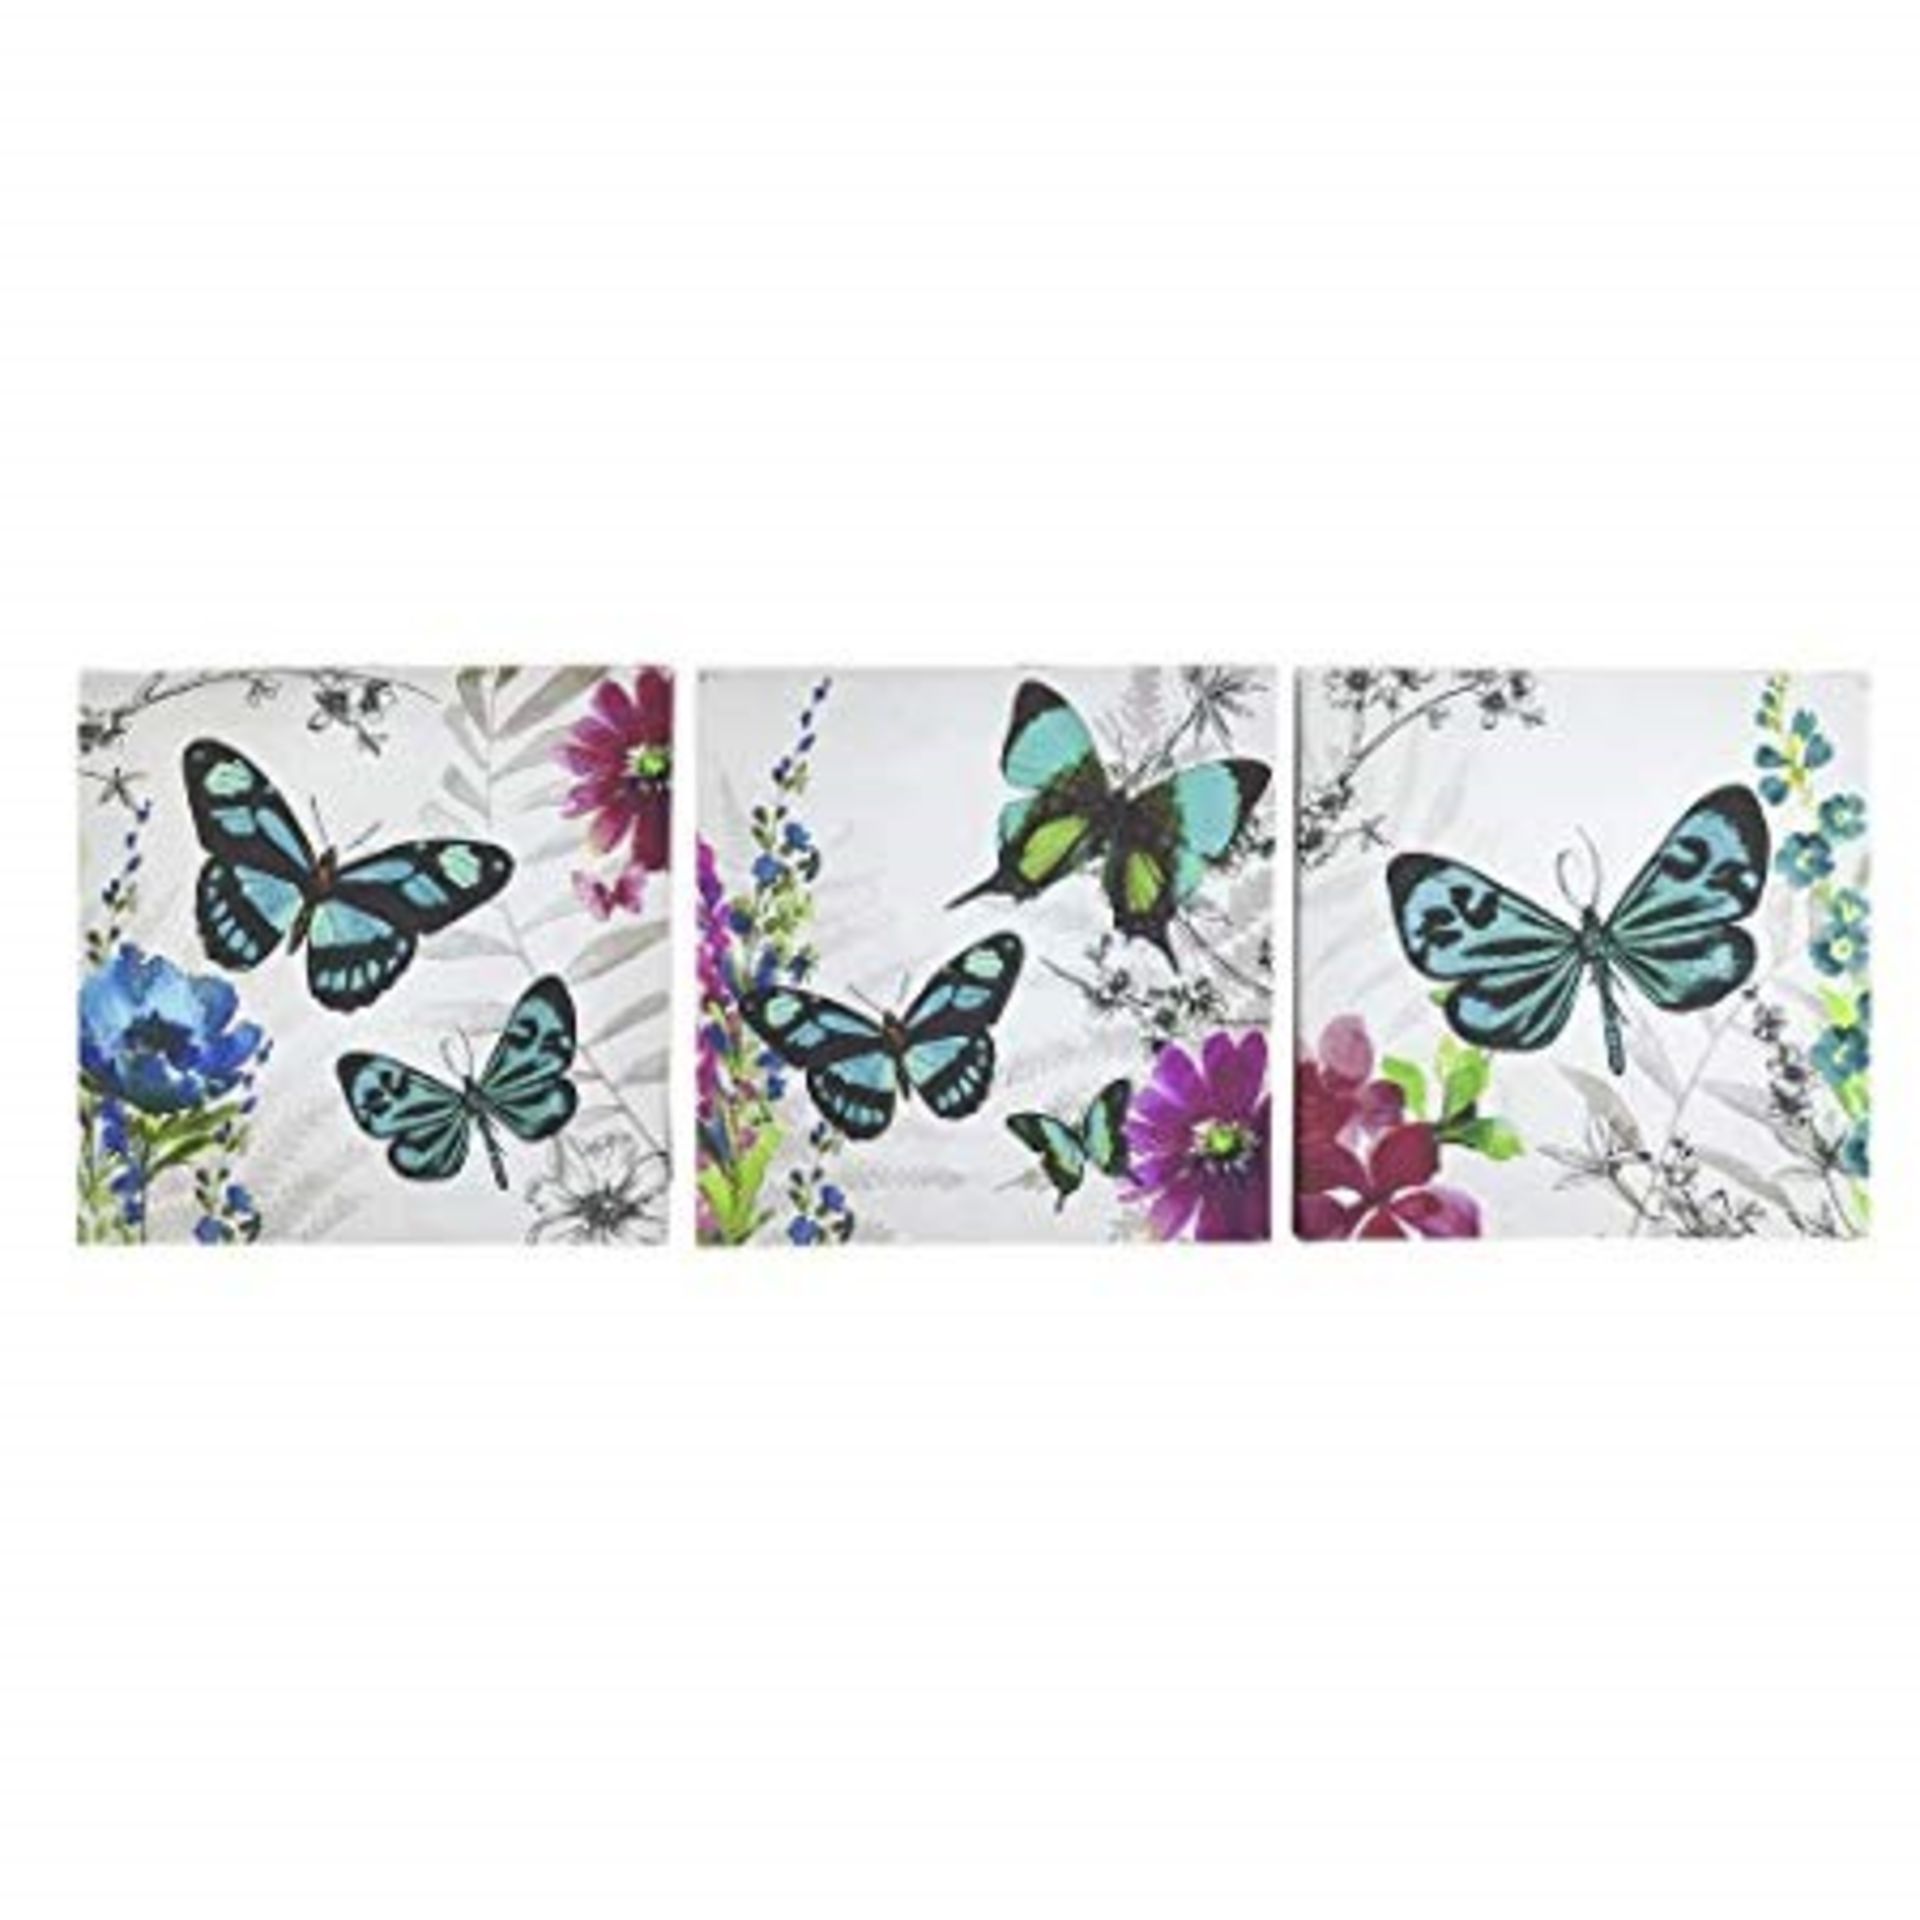 1 AS NEW BOXED ARTHOUSE SET OF 3 EXOTIC BUTTERFLIES CANVAS IN PINK AND TEAL / RRP £15.99 (VIEWING